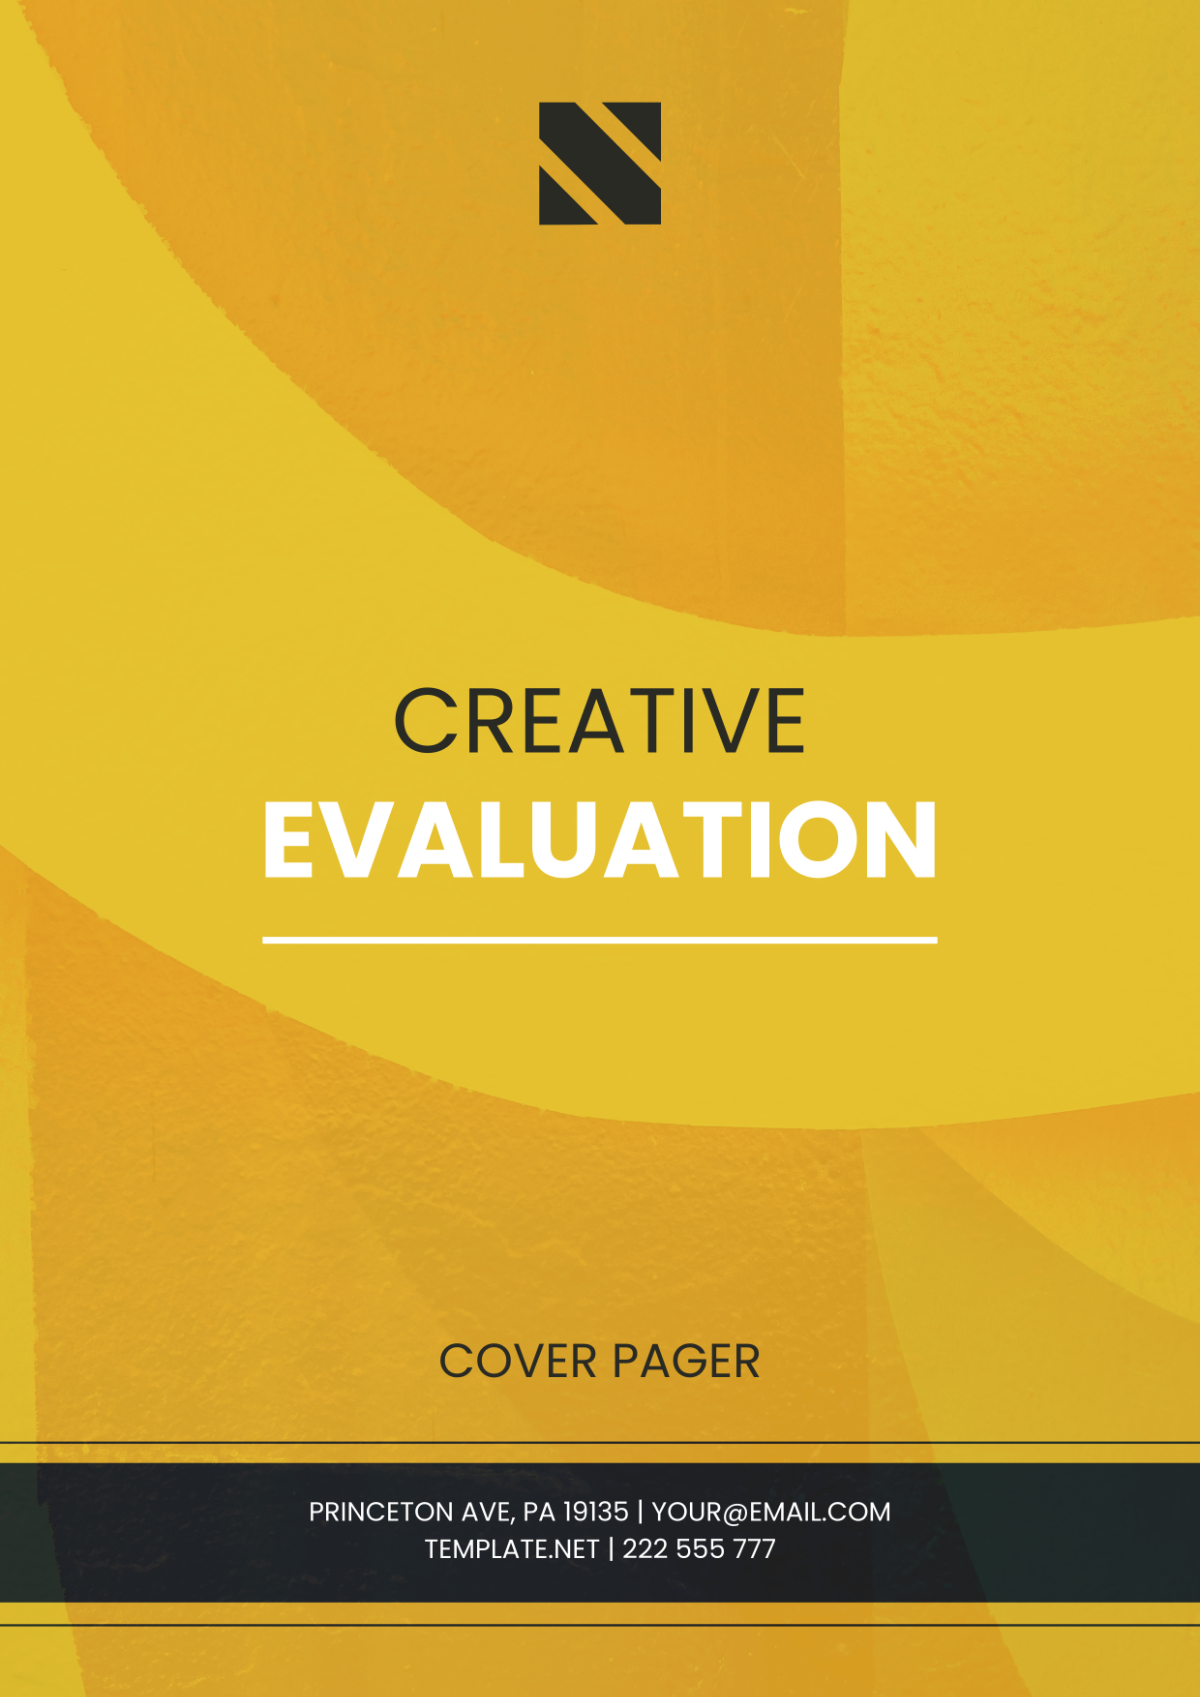 Creative Evaluation Cover Page Template